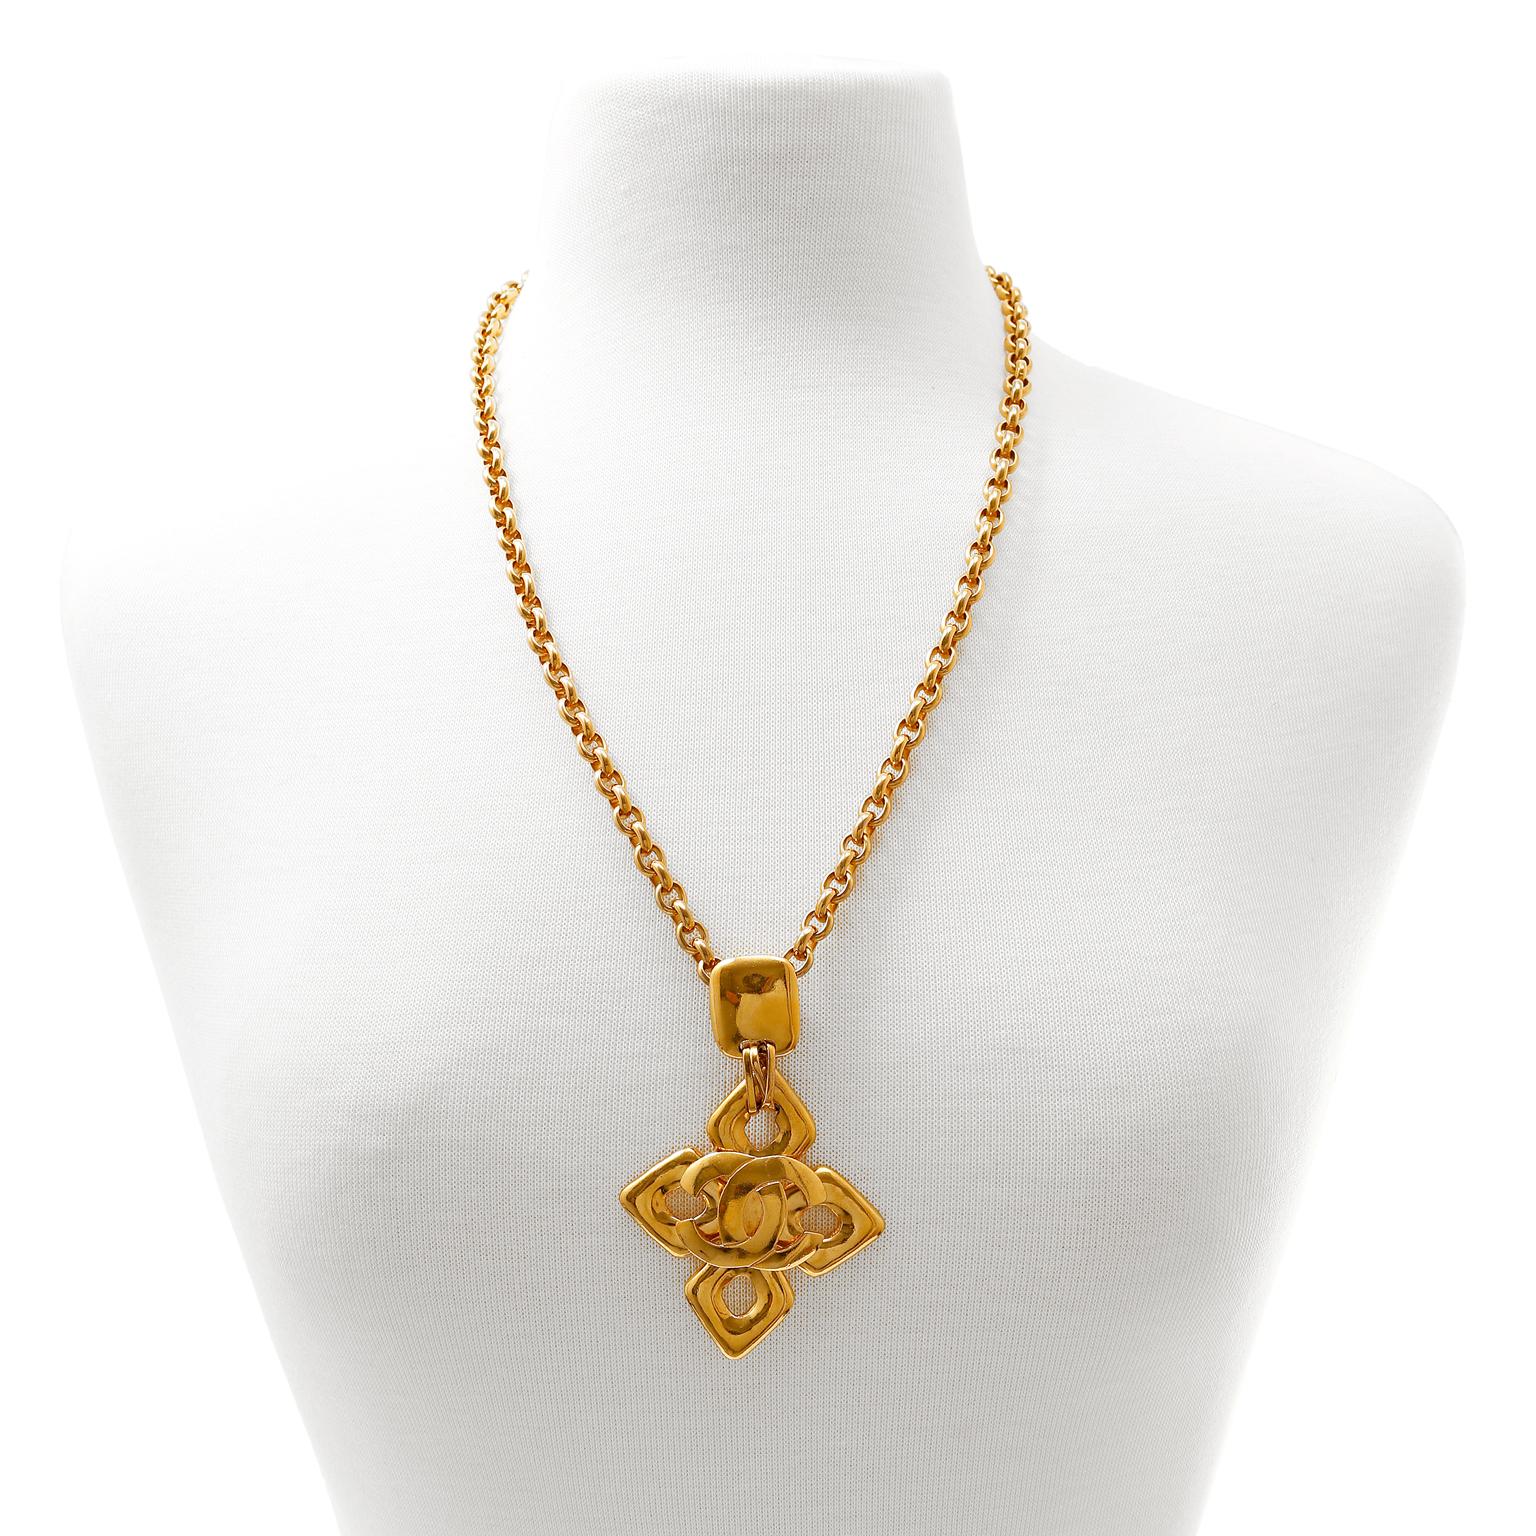 This authentic Chanel Gold CC Cross Necklace is in excellent condition.  24 karat gold plated chain is approximately 25.5 inches long.  Large gold tone quatrefoil cross with interlocking CC, approximately 2.5 x 3.5 inches.  

PBF 10148
